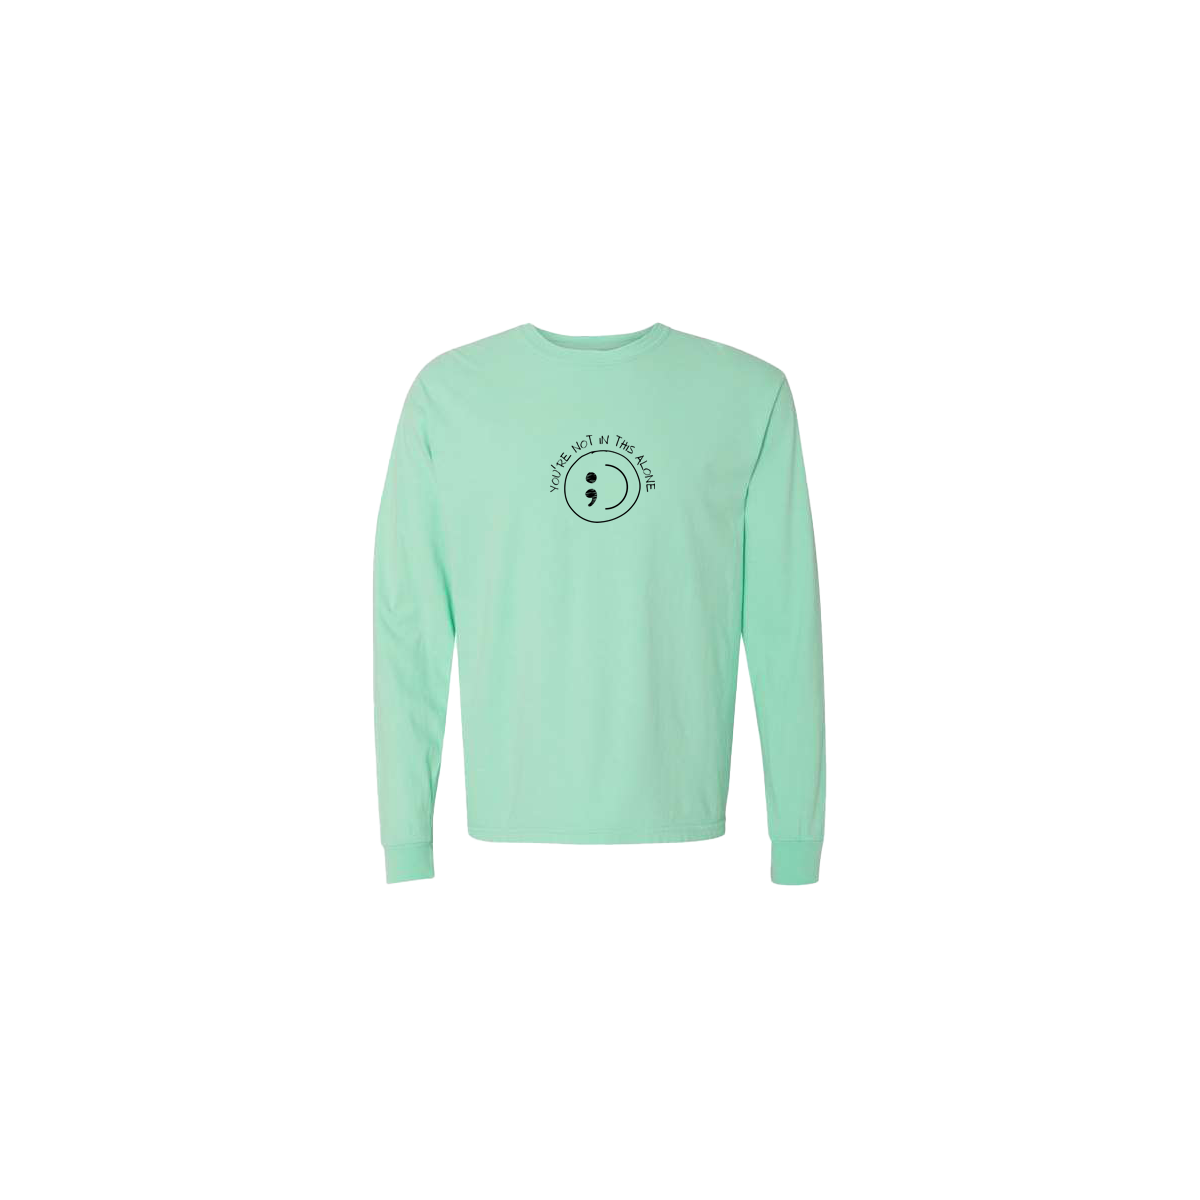 You're Not In This Alone Embroidered Mint Long Sleeve Tshirt - Mental Health Awareness Clothing